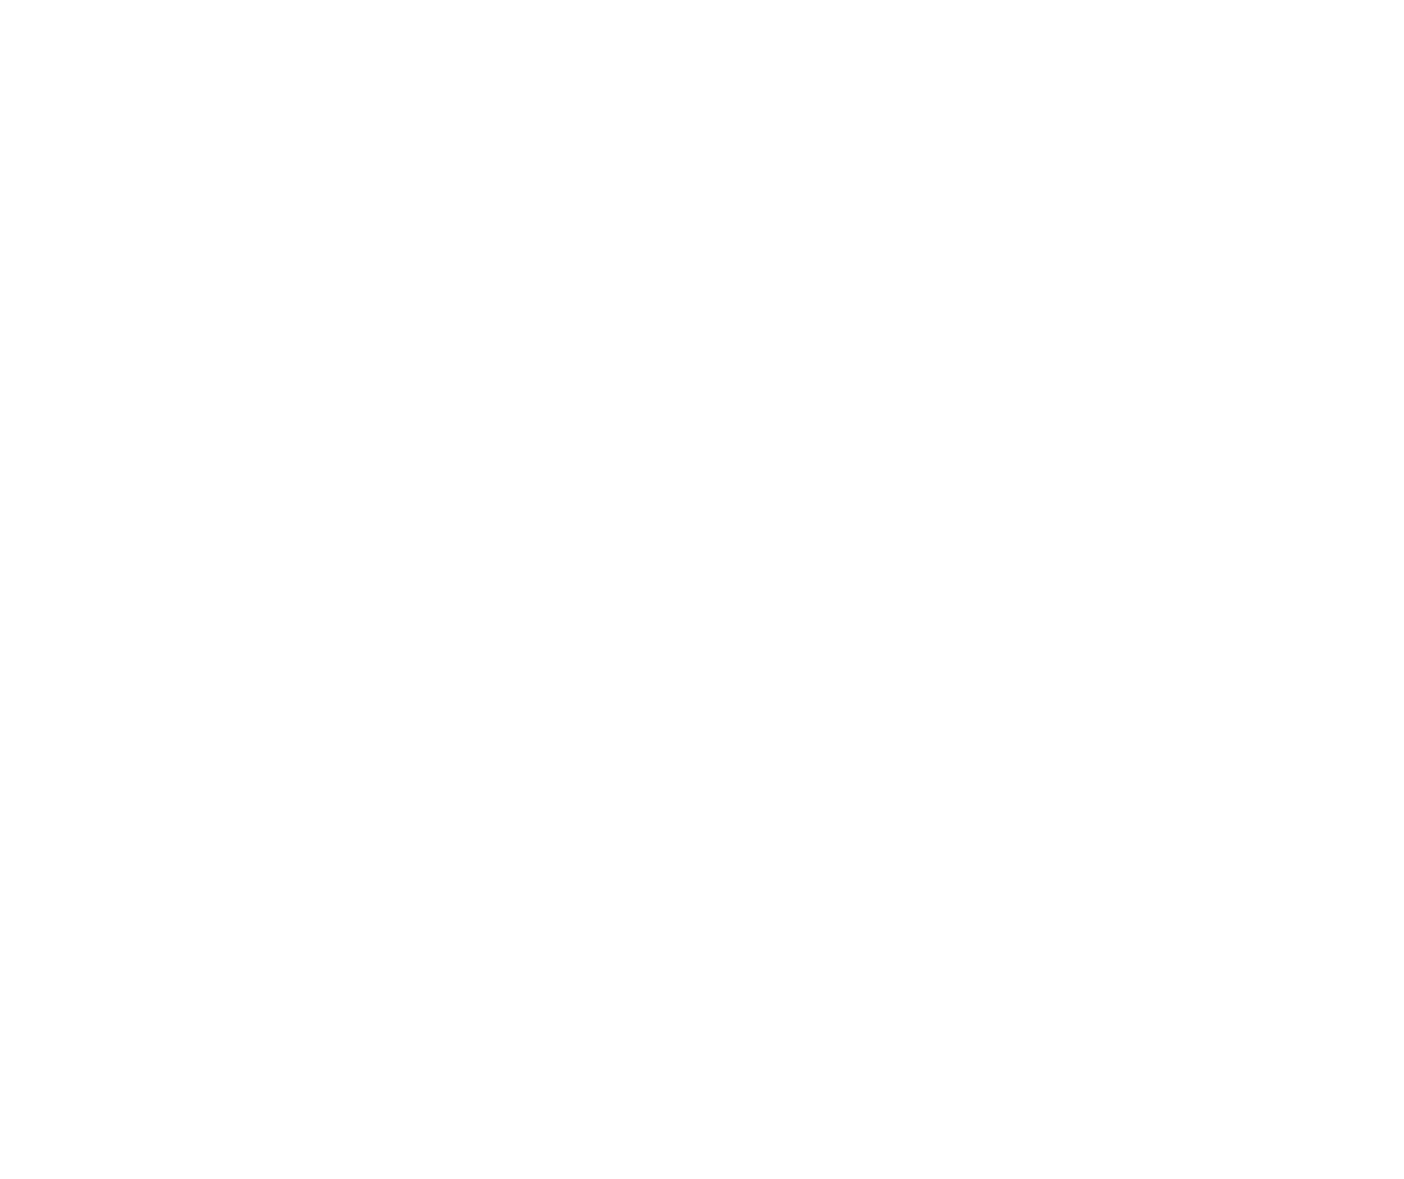 We make world class quality, competitive price, and customer satisfiaction